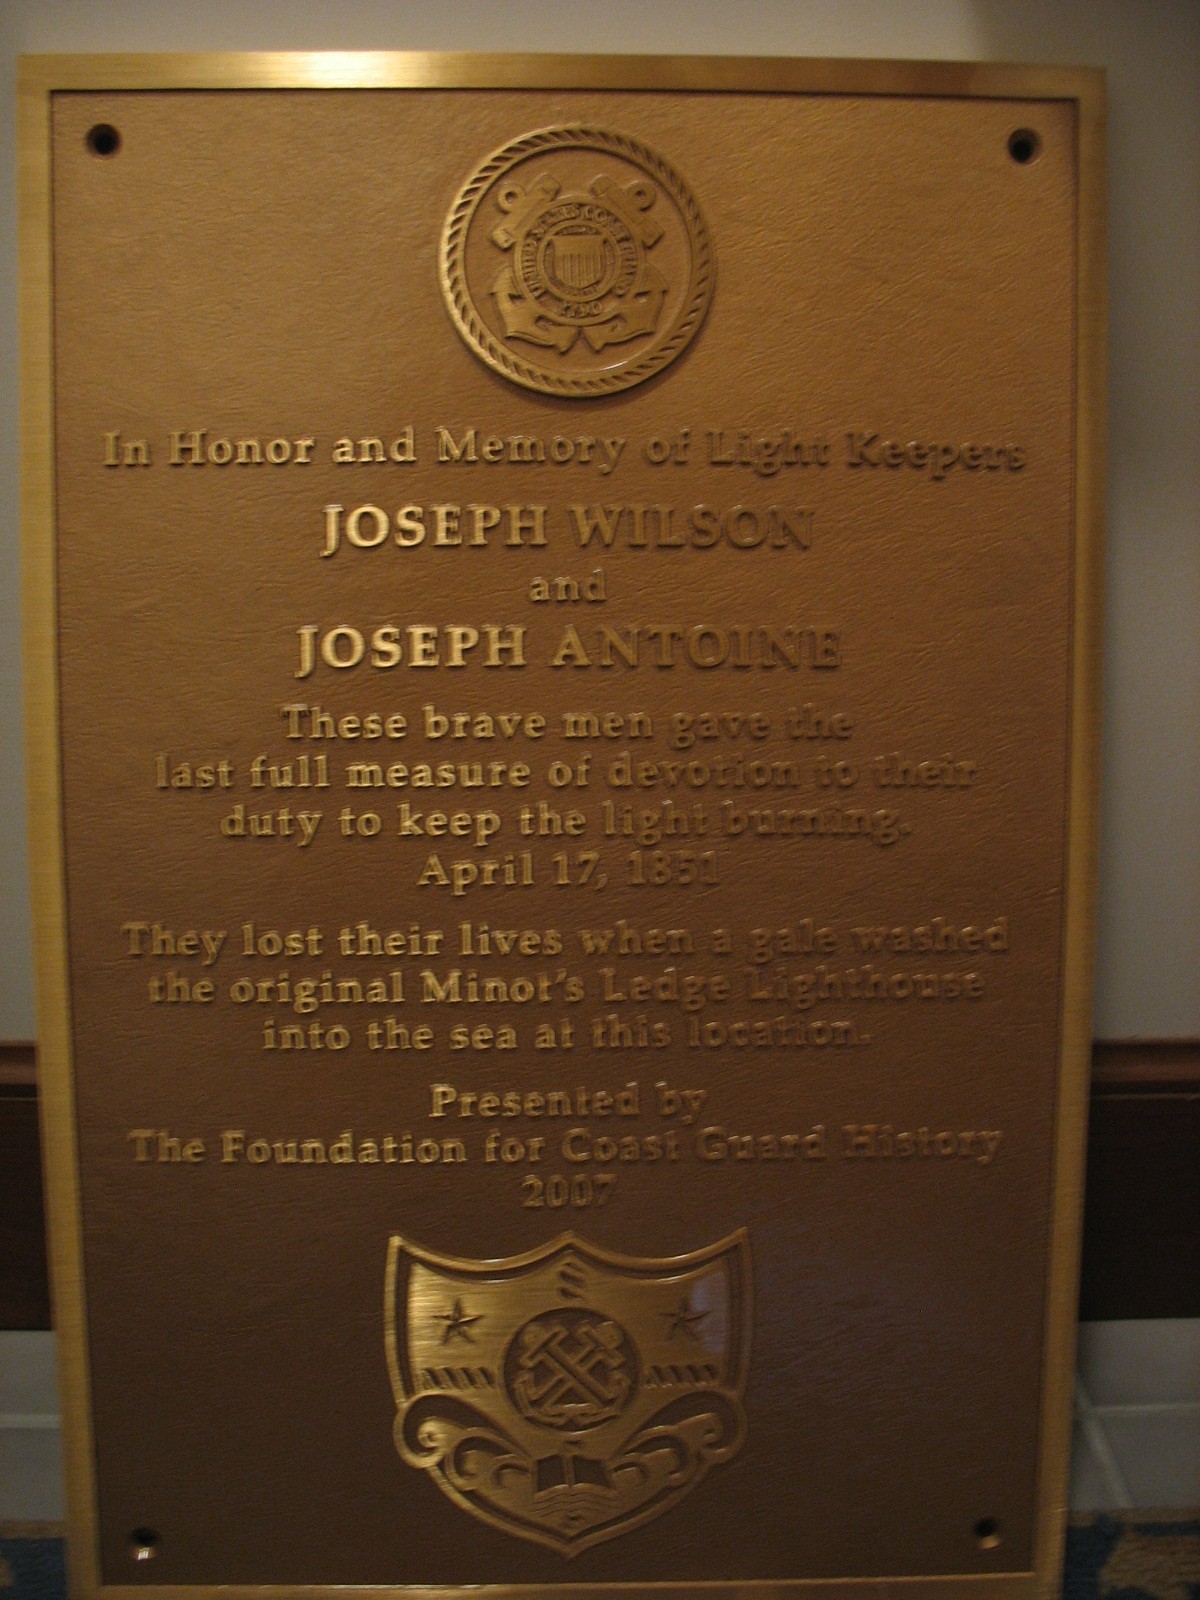 Memorial plaque provided by the Foundation for Coast Guard History honoring the lighthouse keepers who died in the collapse of the first lighthouse in 1851. (Foundation for Coast Guard History)